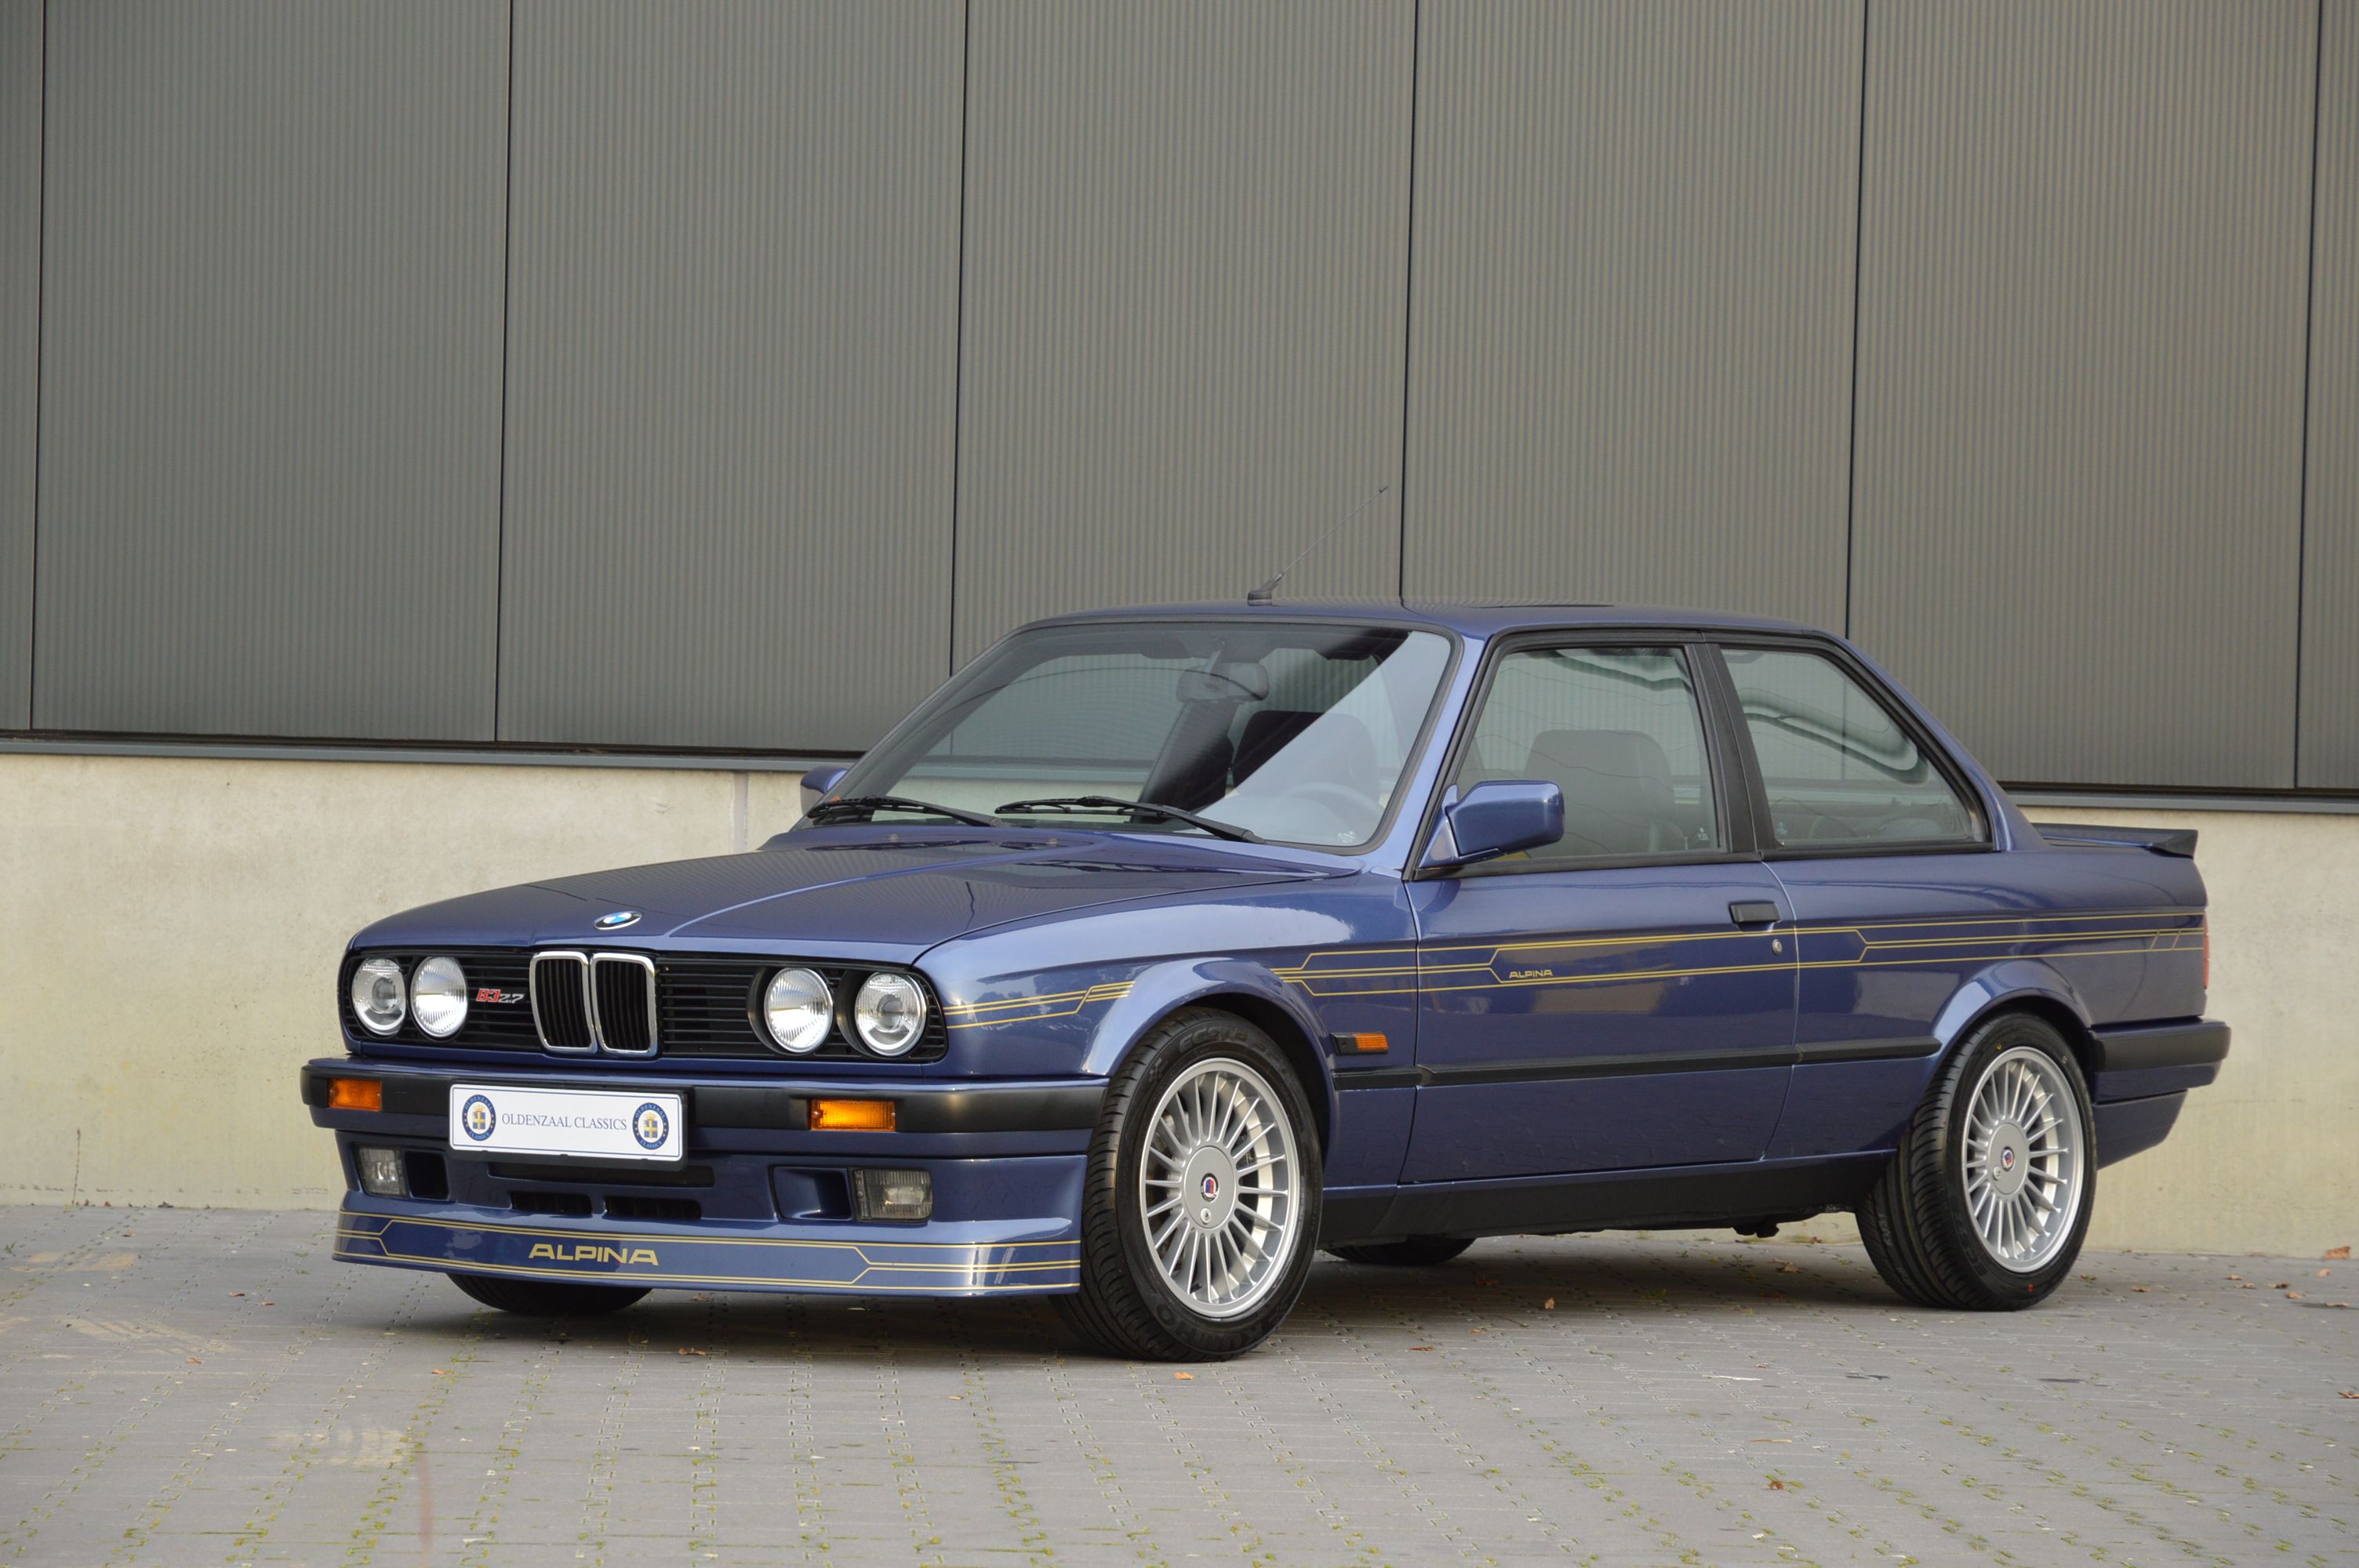 The petrol powered two-door Beemer was first released in 1983